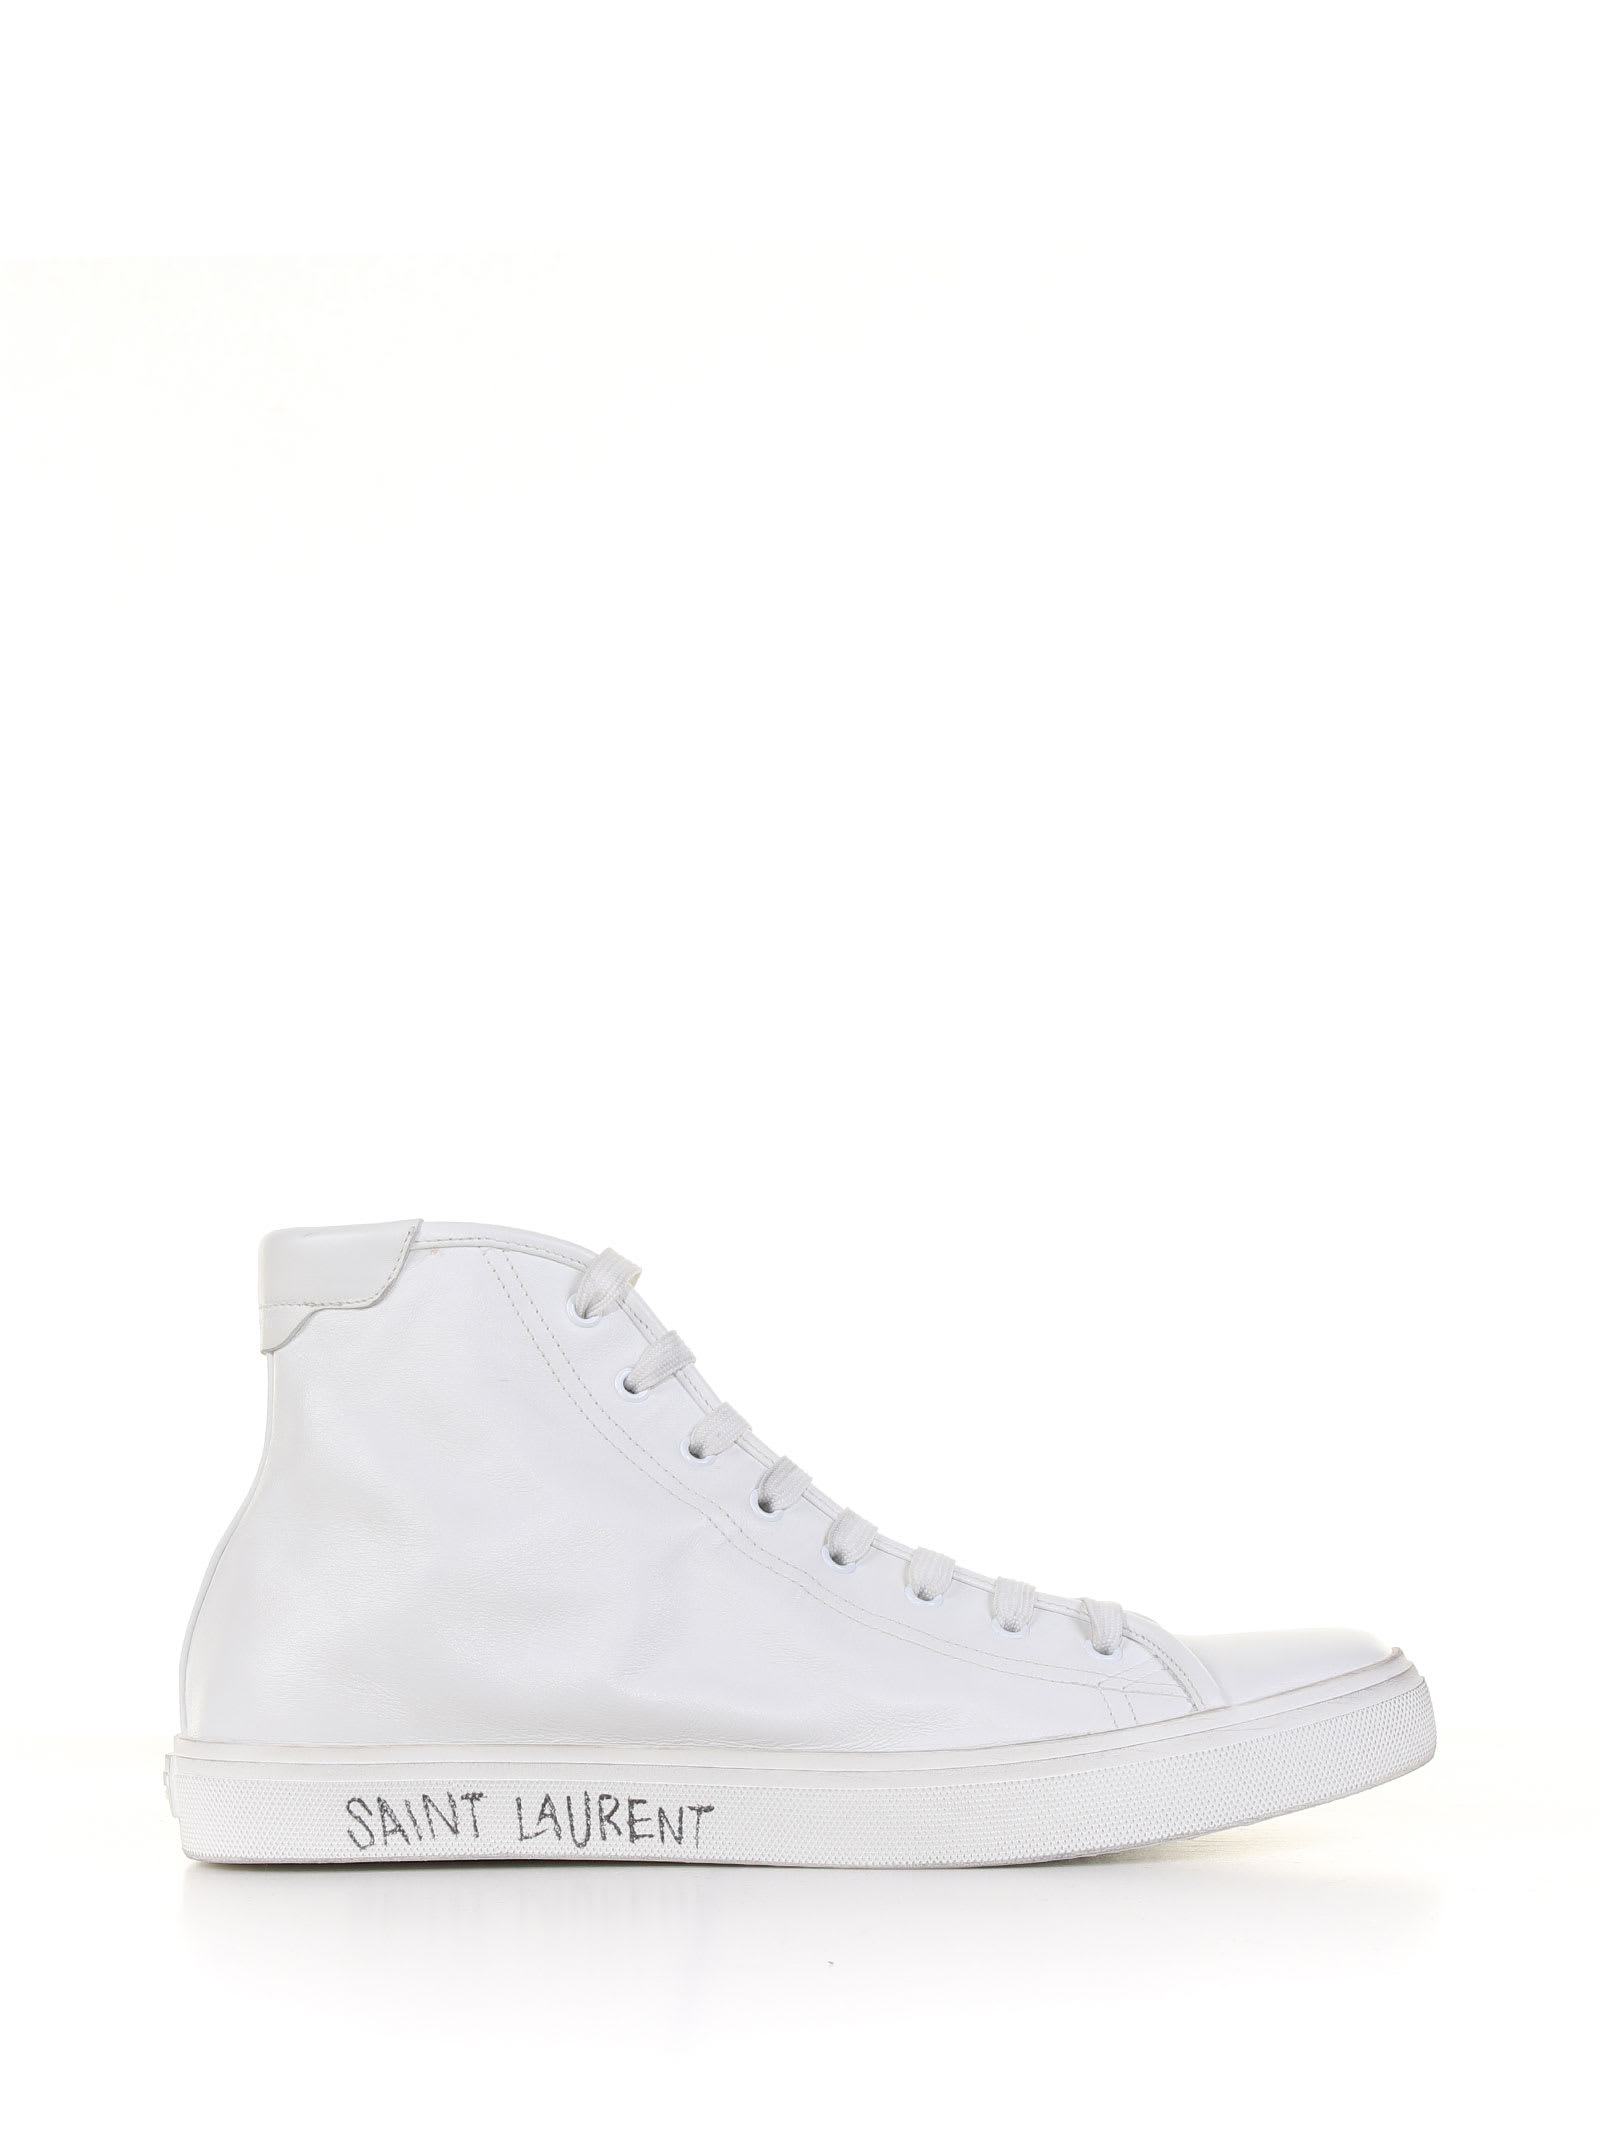 Saint Laurent Malibu Mid-top Sneaker In Smooth Leather